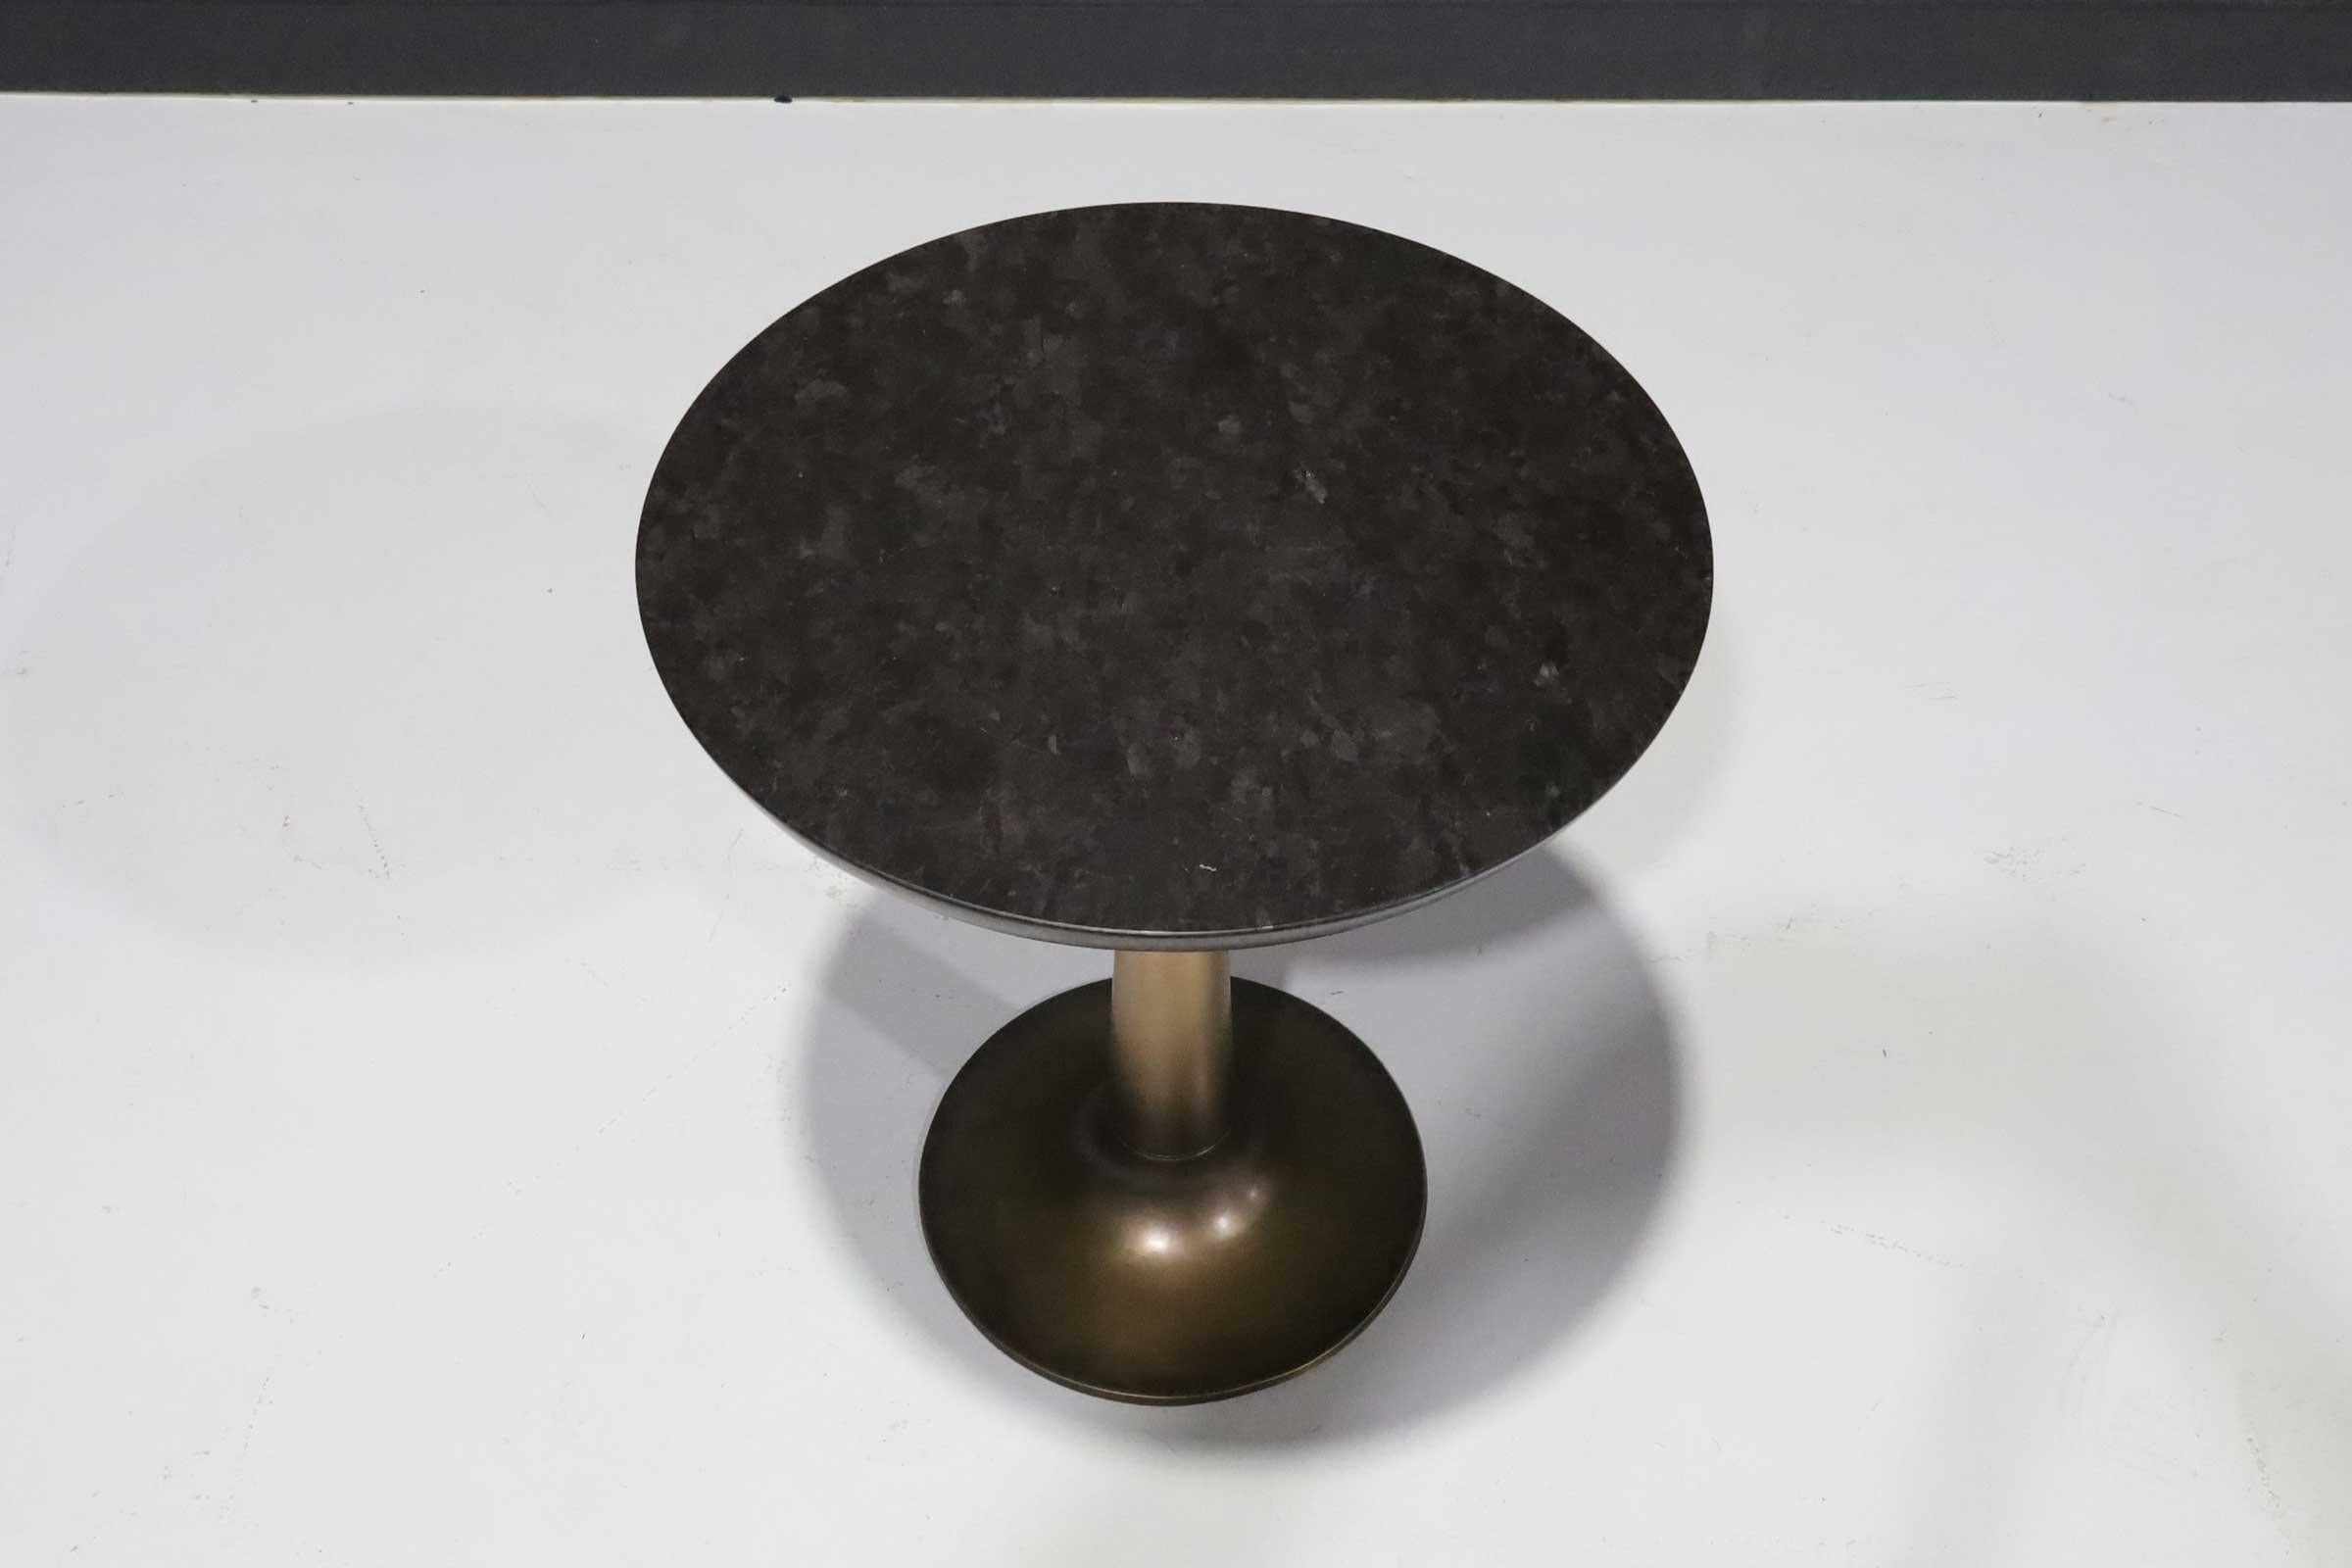 Beautiful side table by Holly Hunt, the Martini side table. Clean lines, bronze cast base and a stone top.